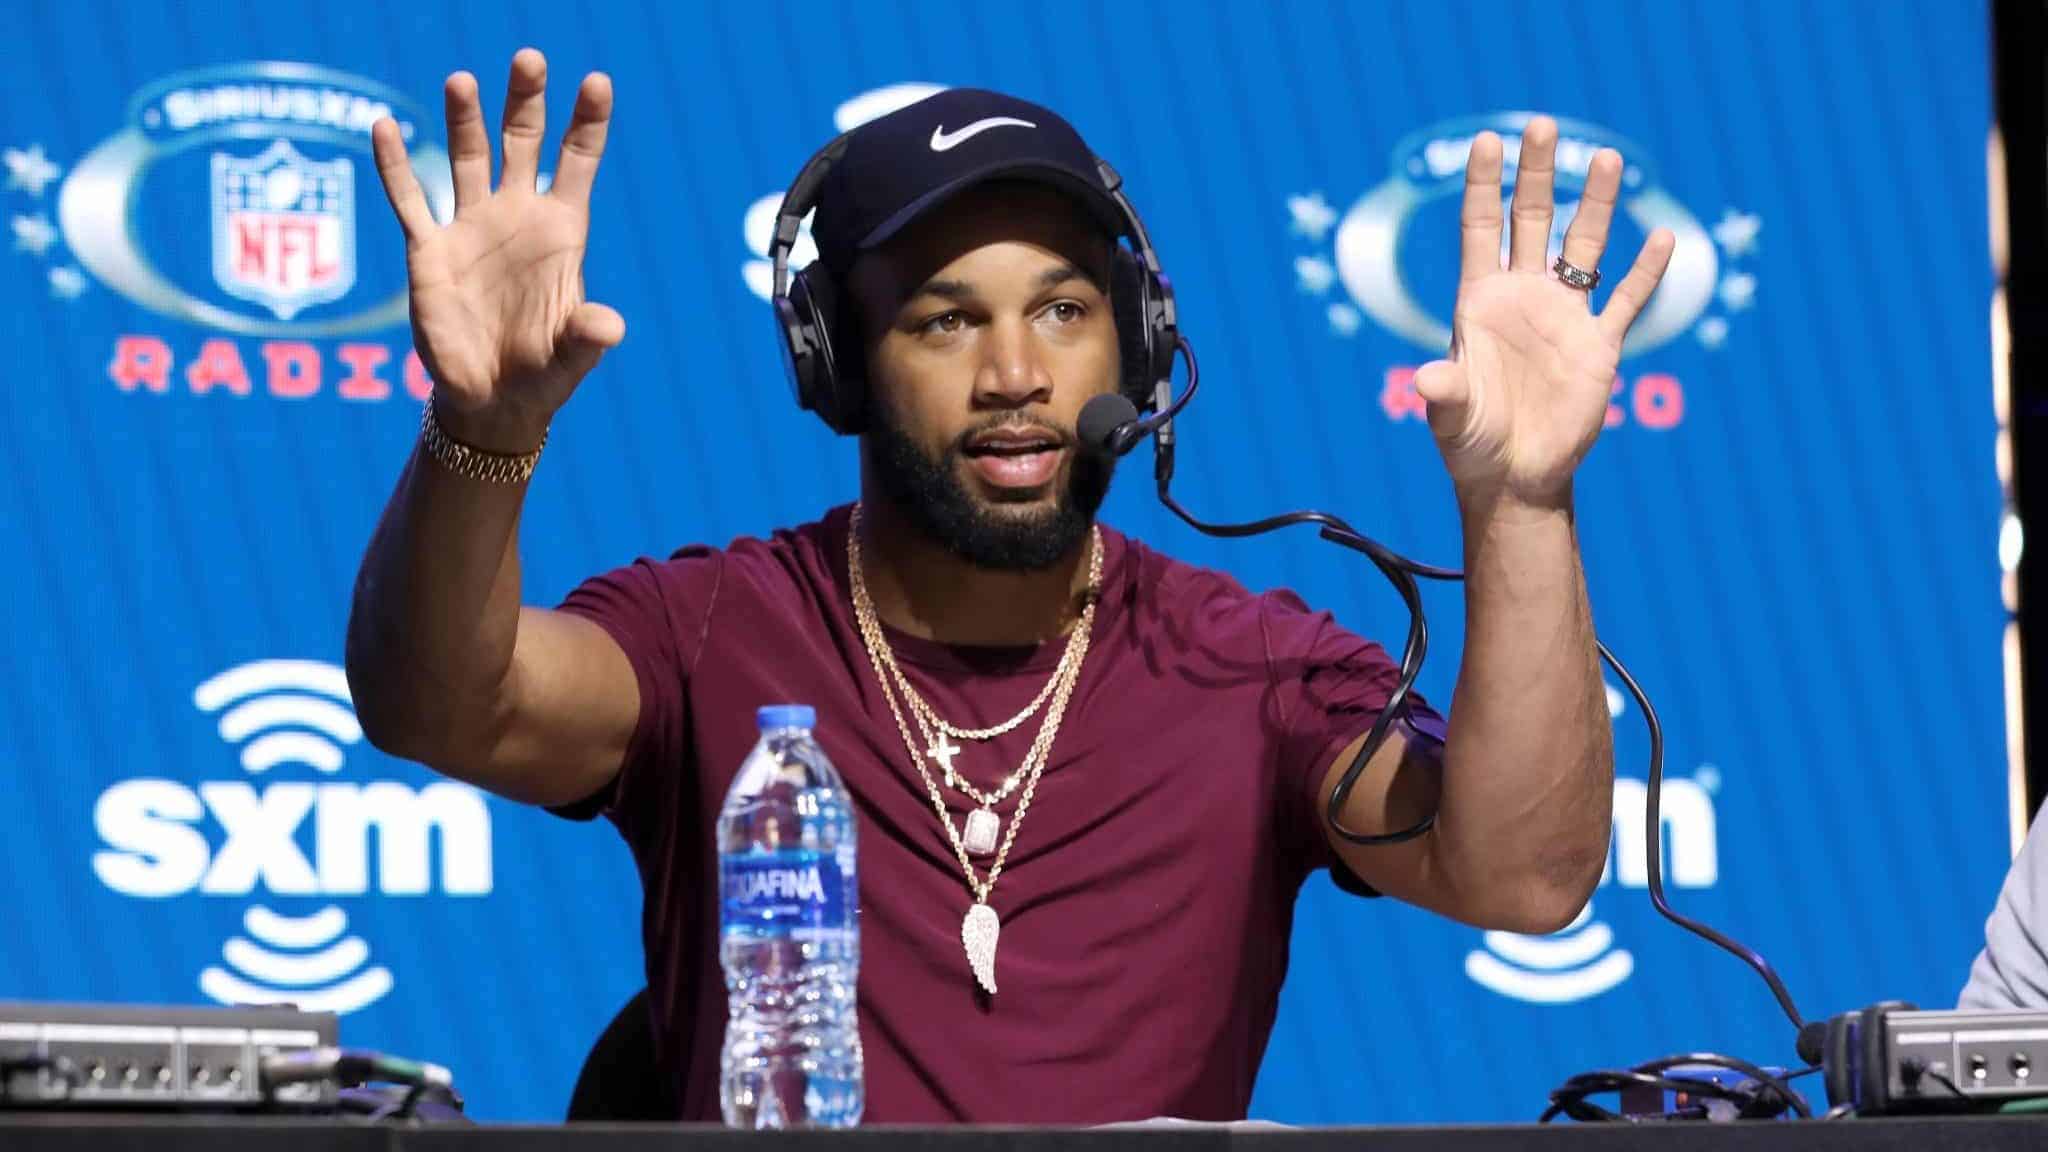 MIAMI, FLORIDA - JANUARY 31: NFL wide receiver Golden Tate of the New York Giants speaks onstage during day 3 of SiriusXM at Super Bowl LIV on January 31, 2020 in Miami, Florida.